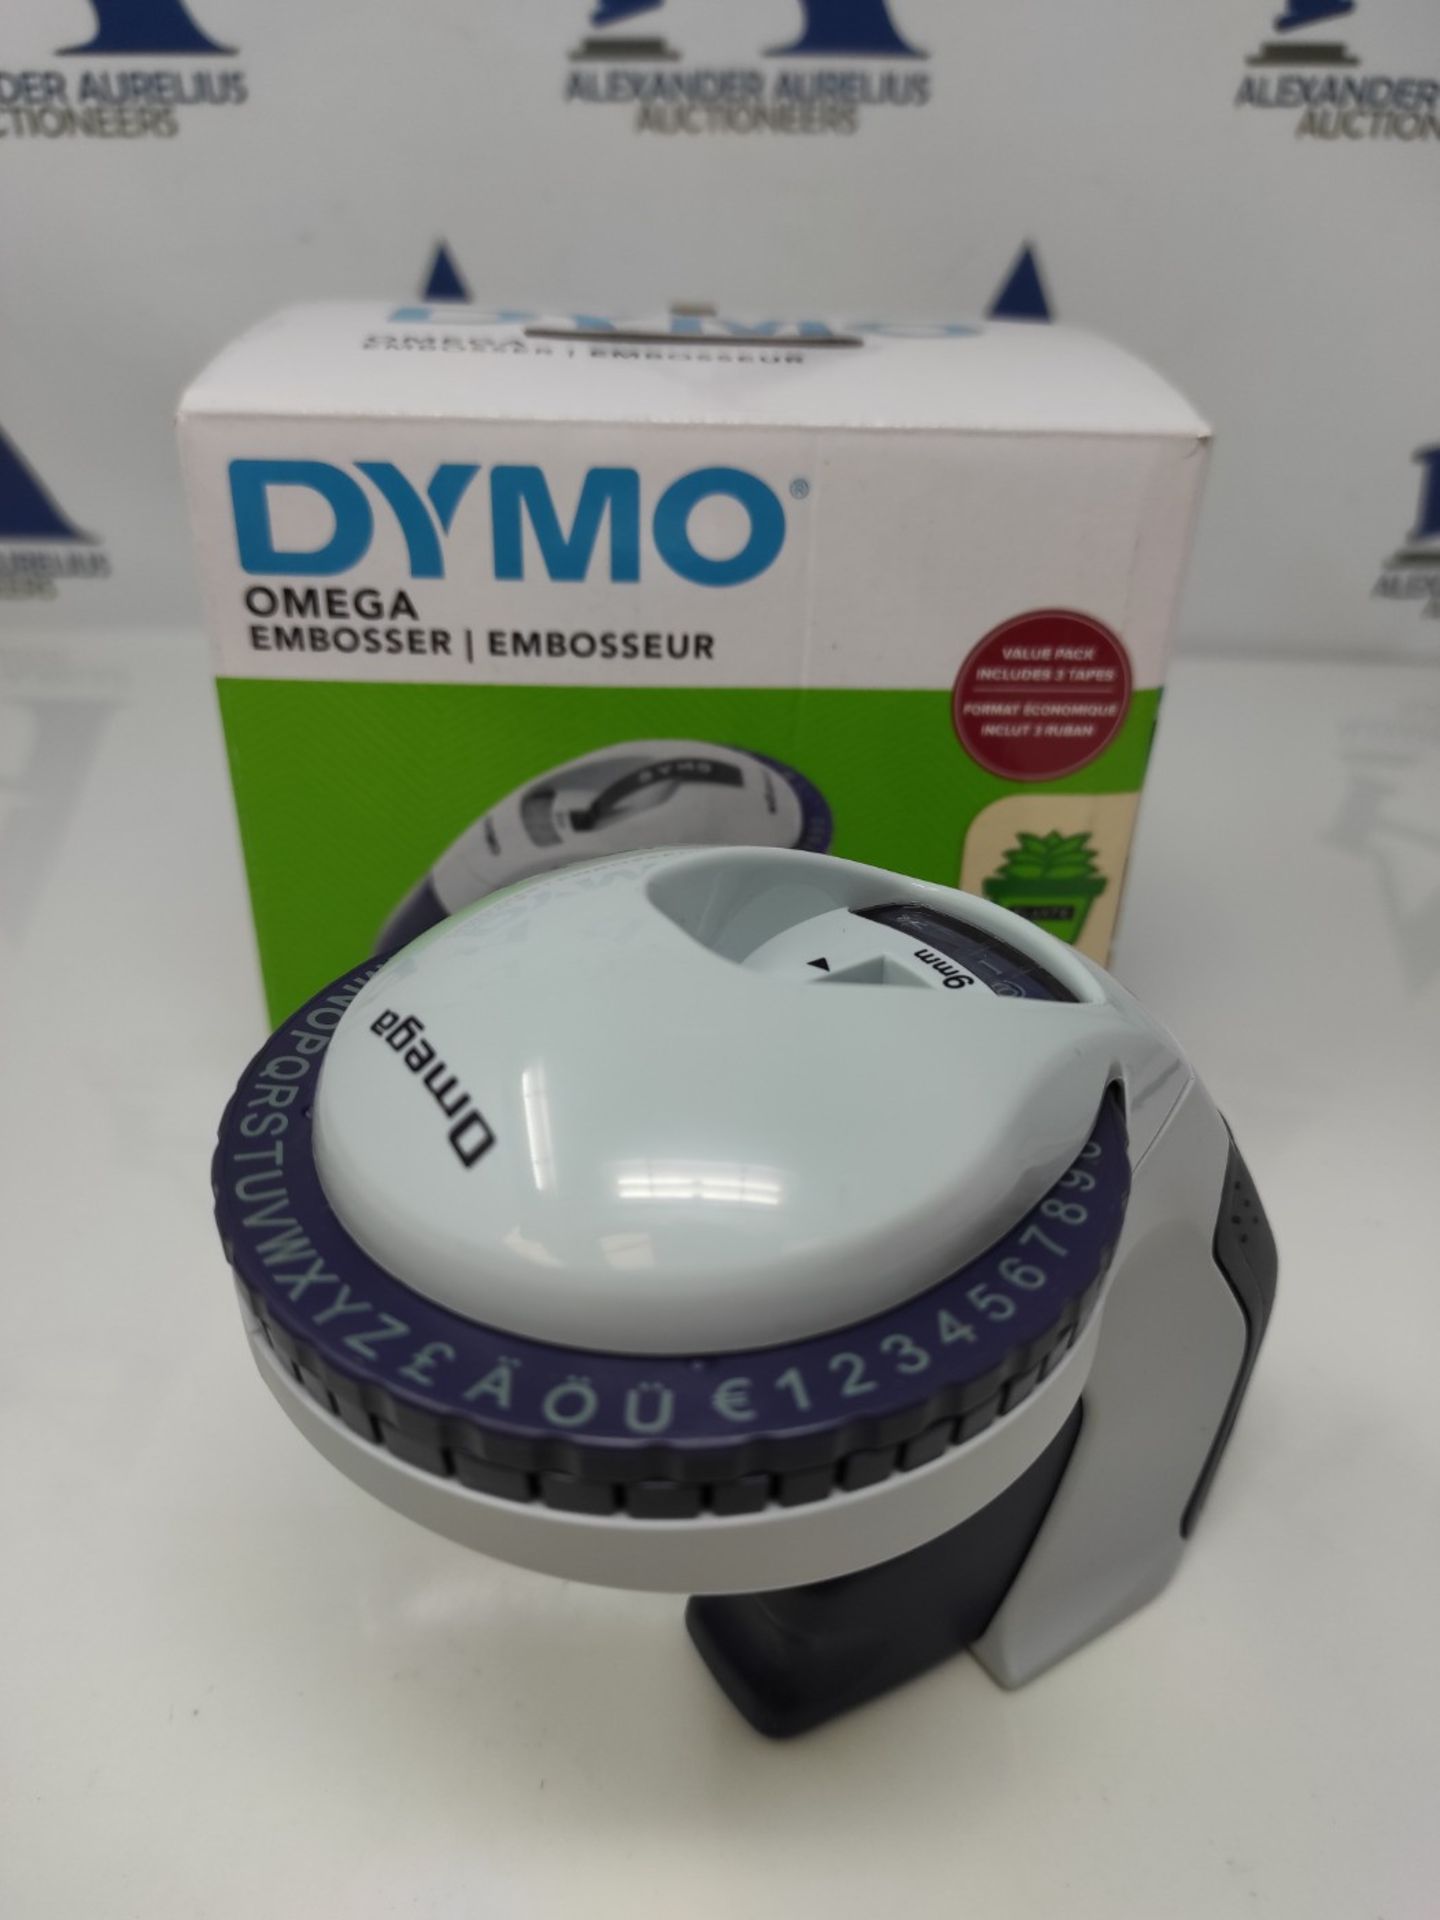 DYMO Embossing device with 3 embossing tapes | Omega labeling device starter set | sma - Image 2 of 2